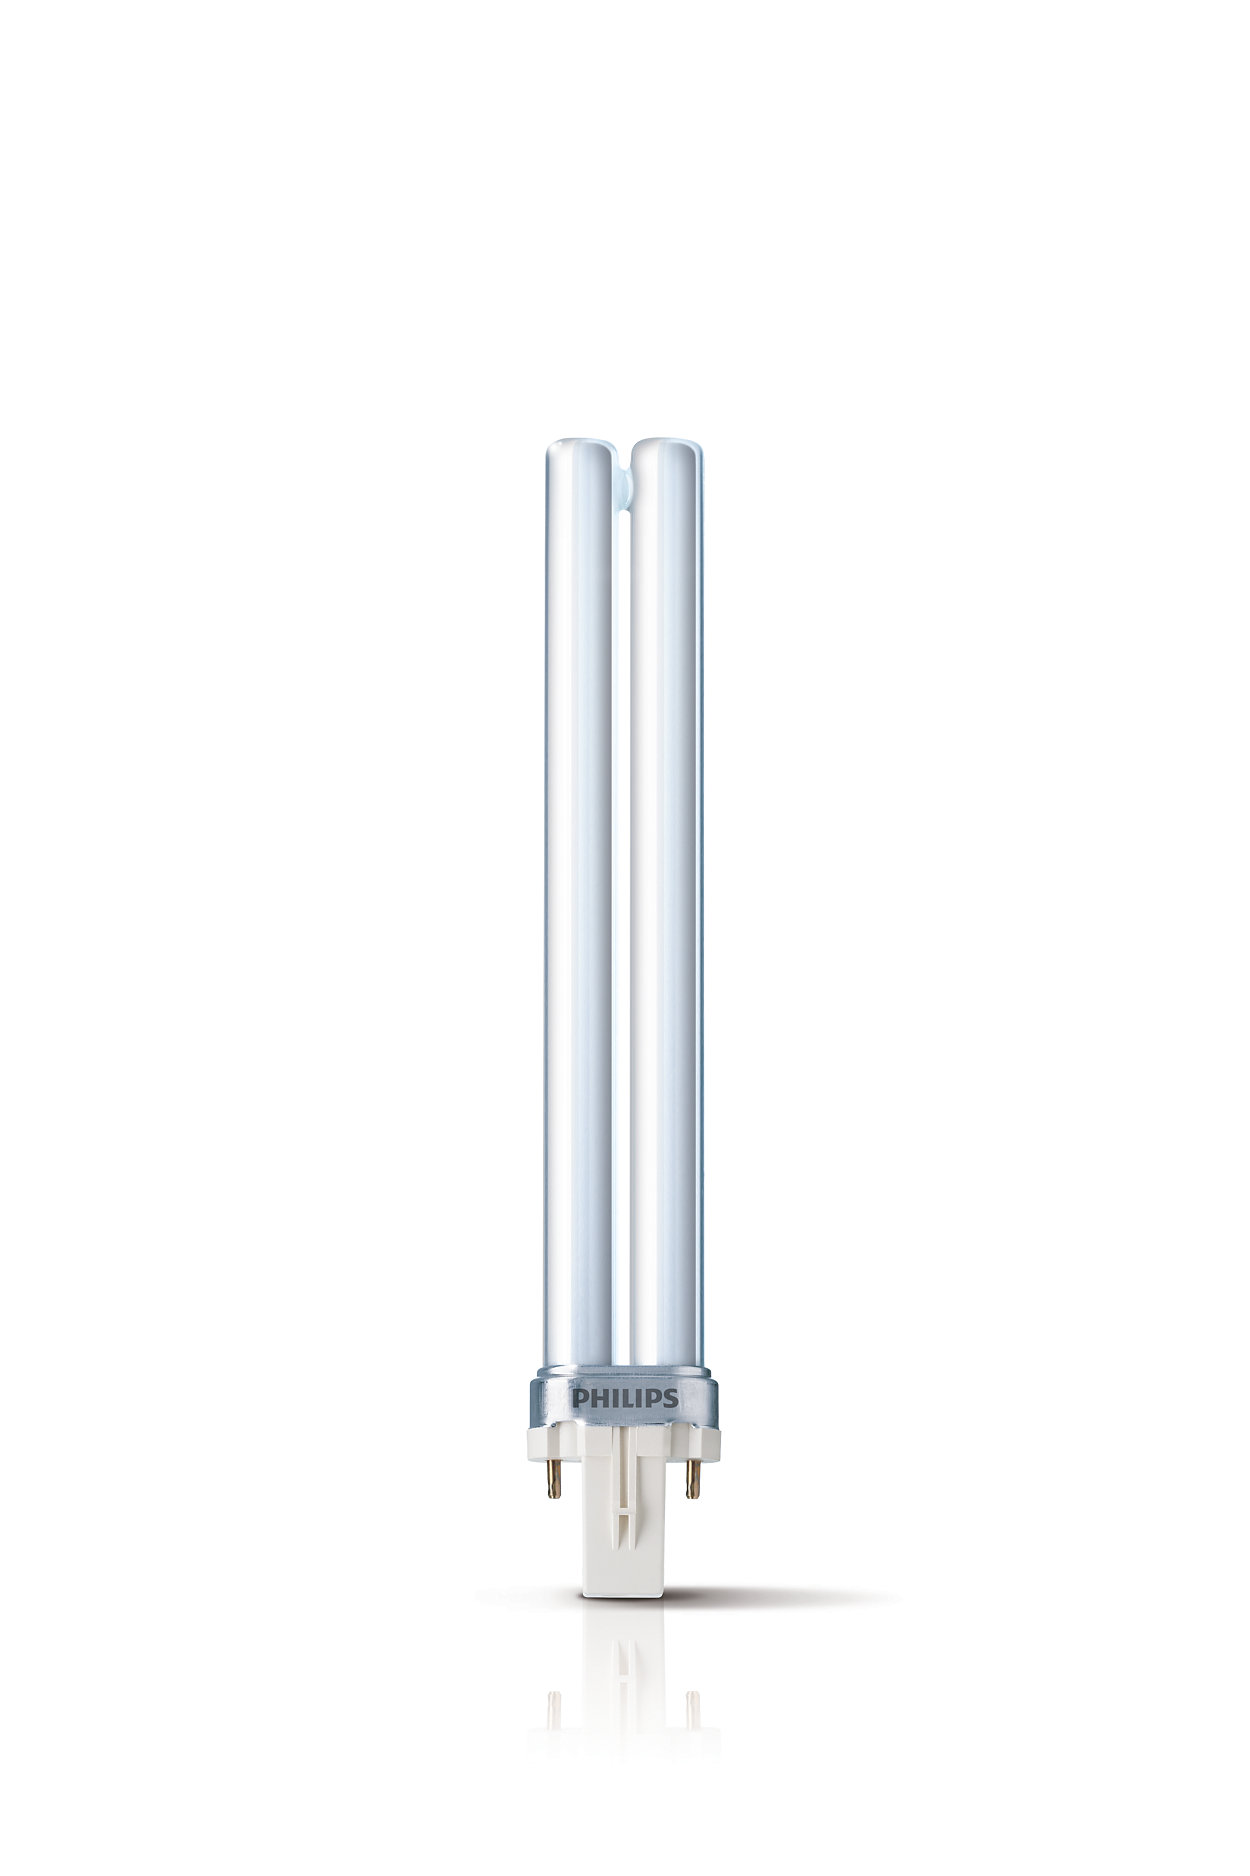 PL-S is a low wattage compact fluorescent lamp